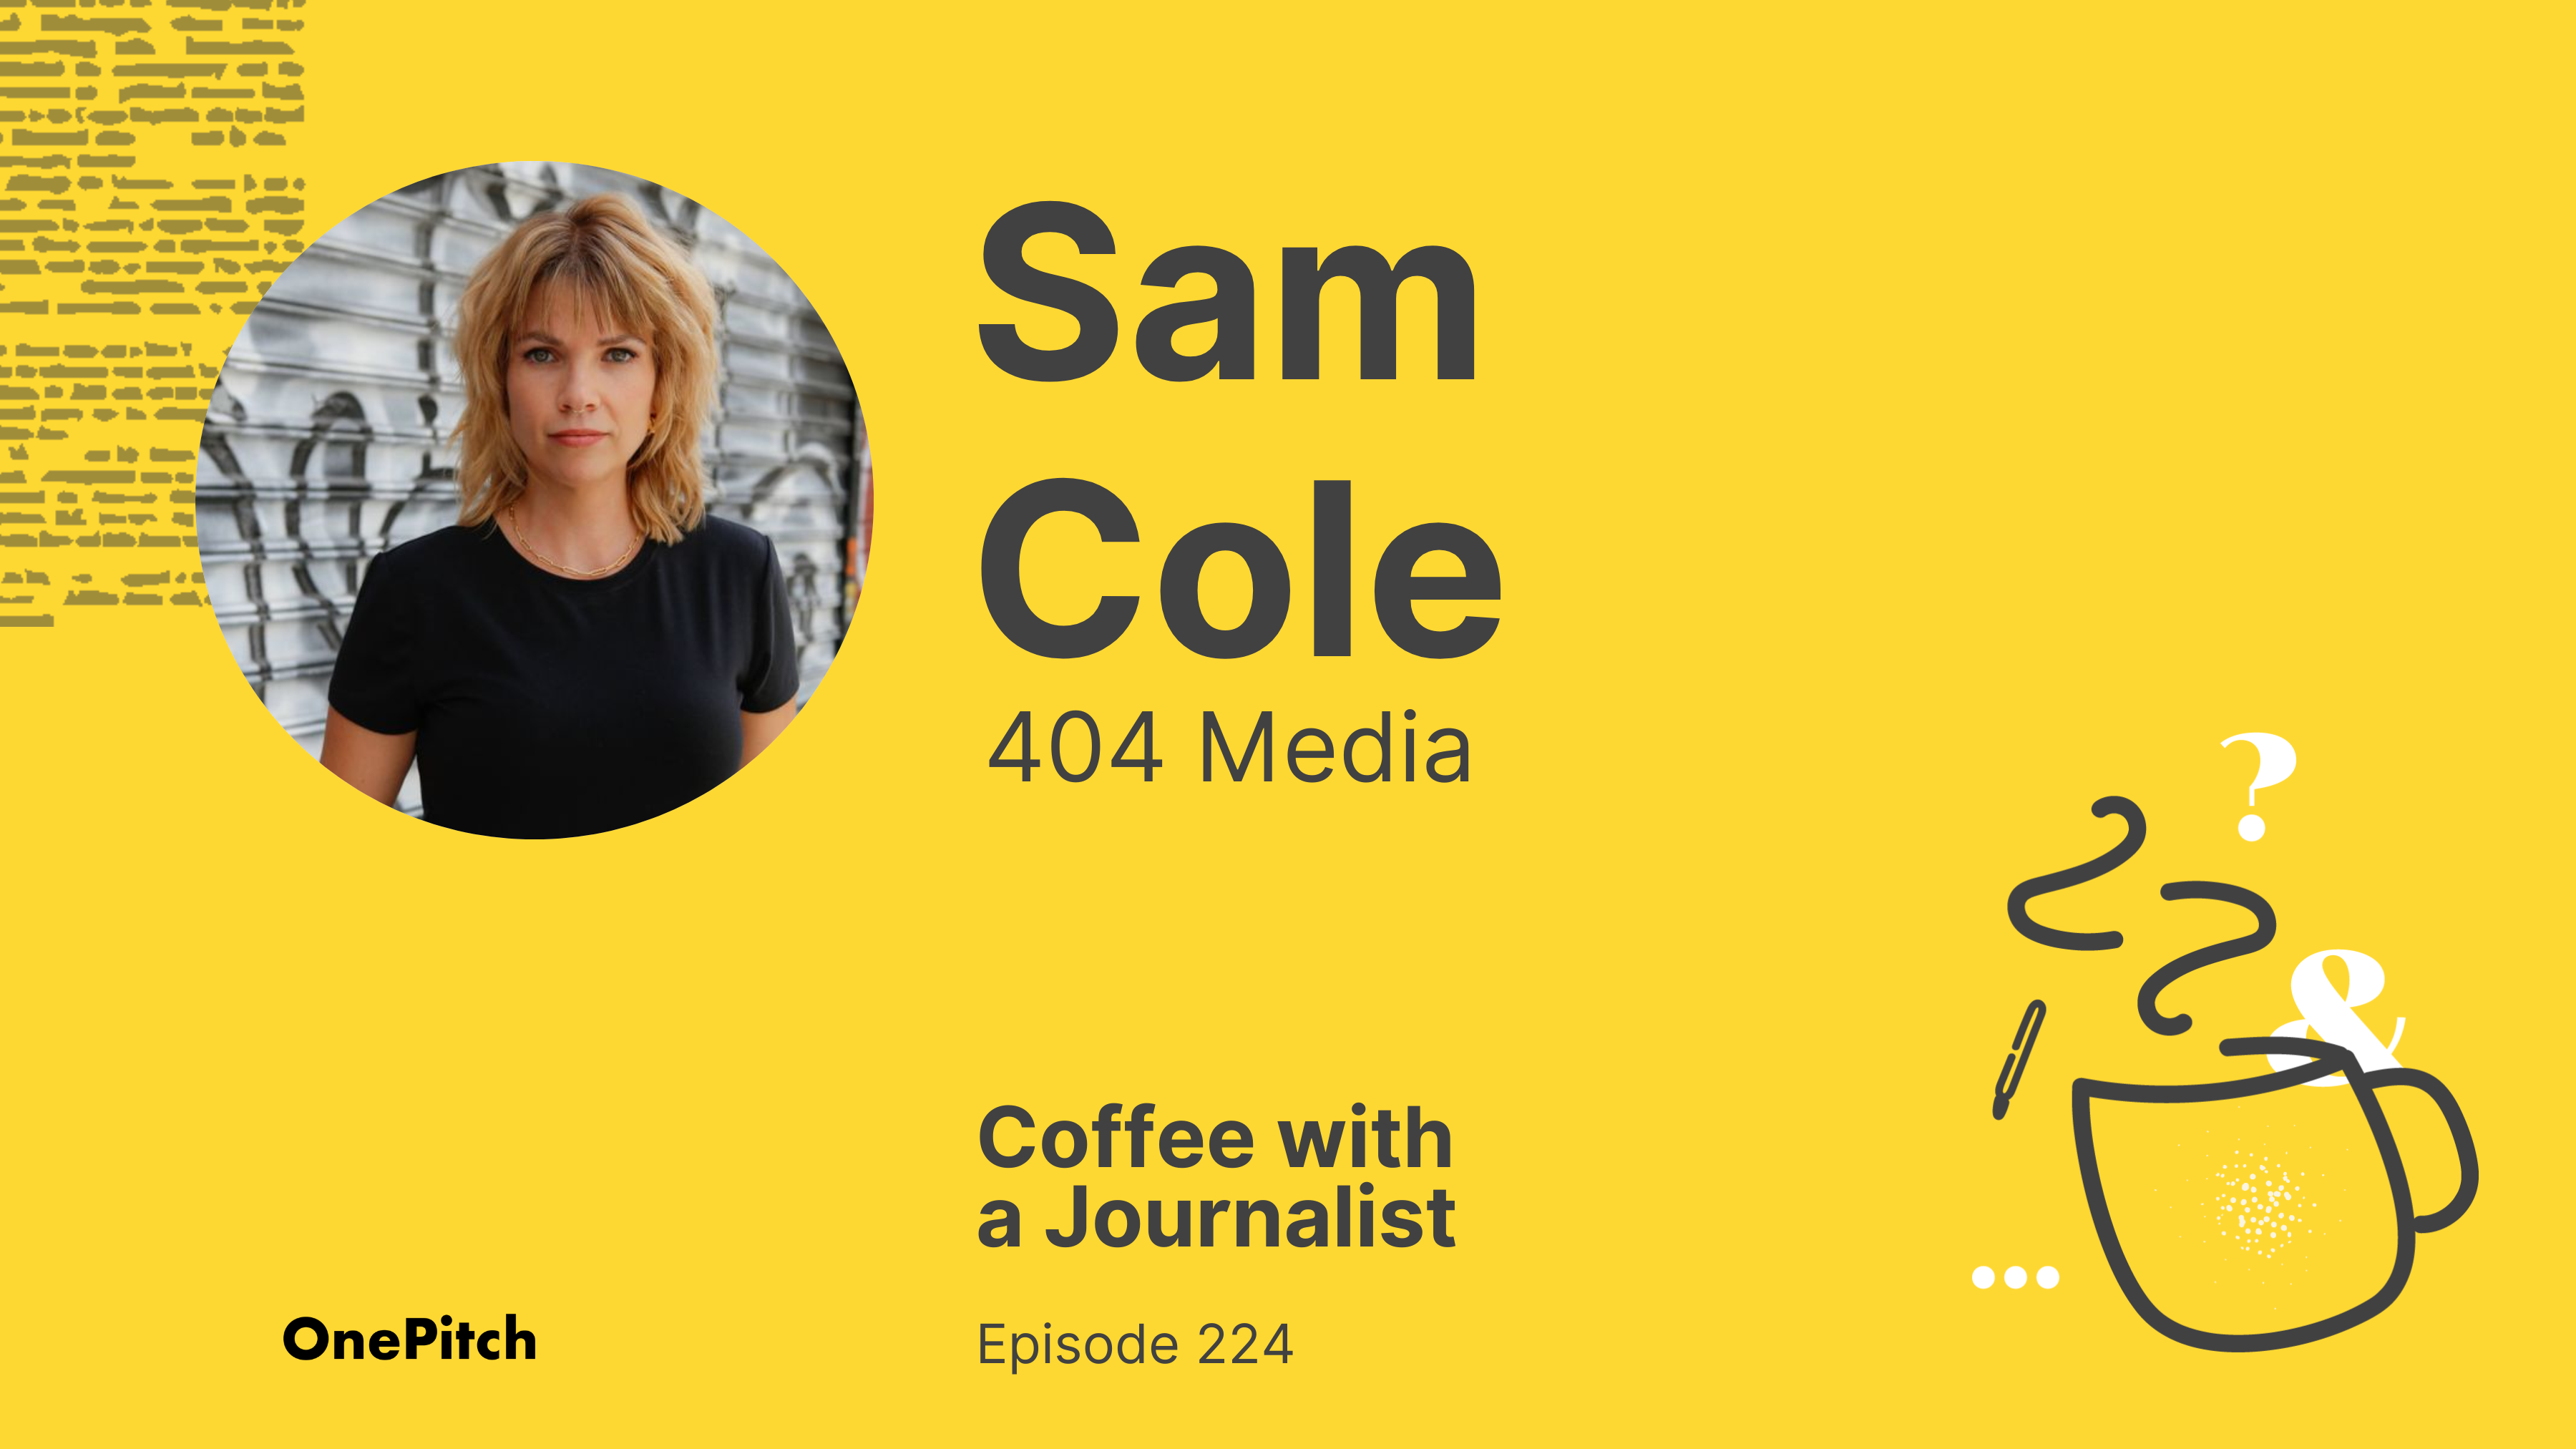 Coffee with a Journalist: Sam Cole, 404 Media